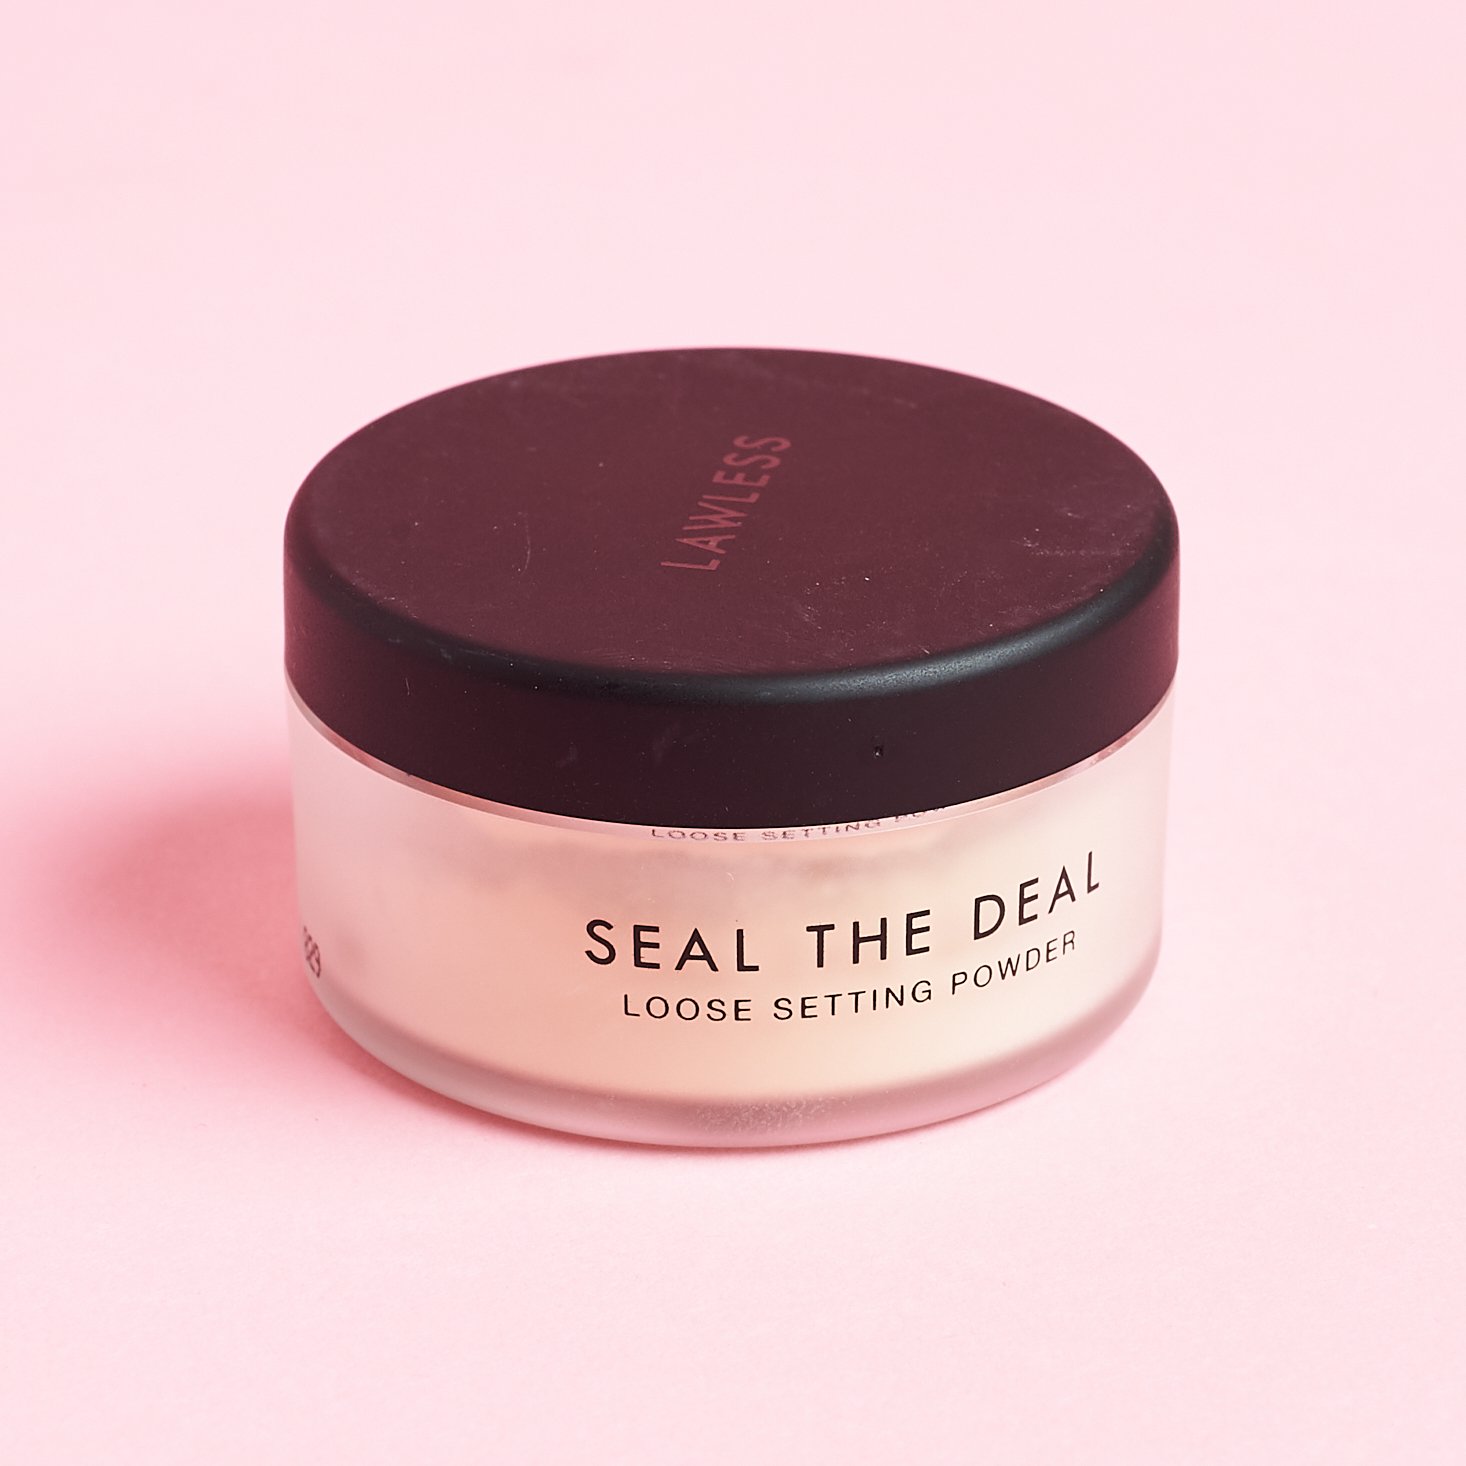 LAWLESS Seal The Deal Loose Setting Powder in Classic Translucent